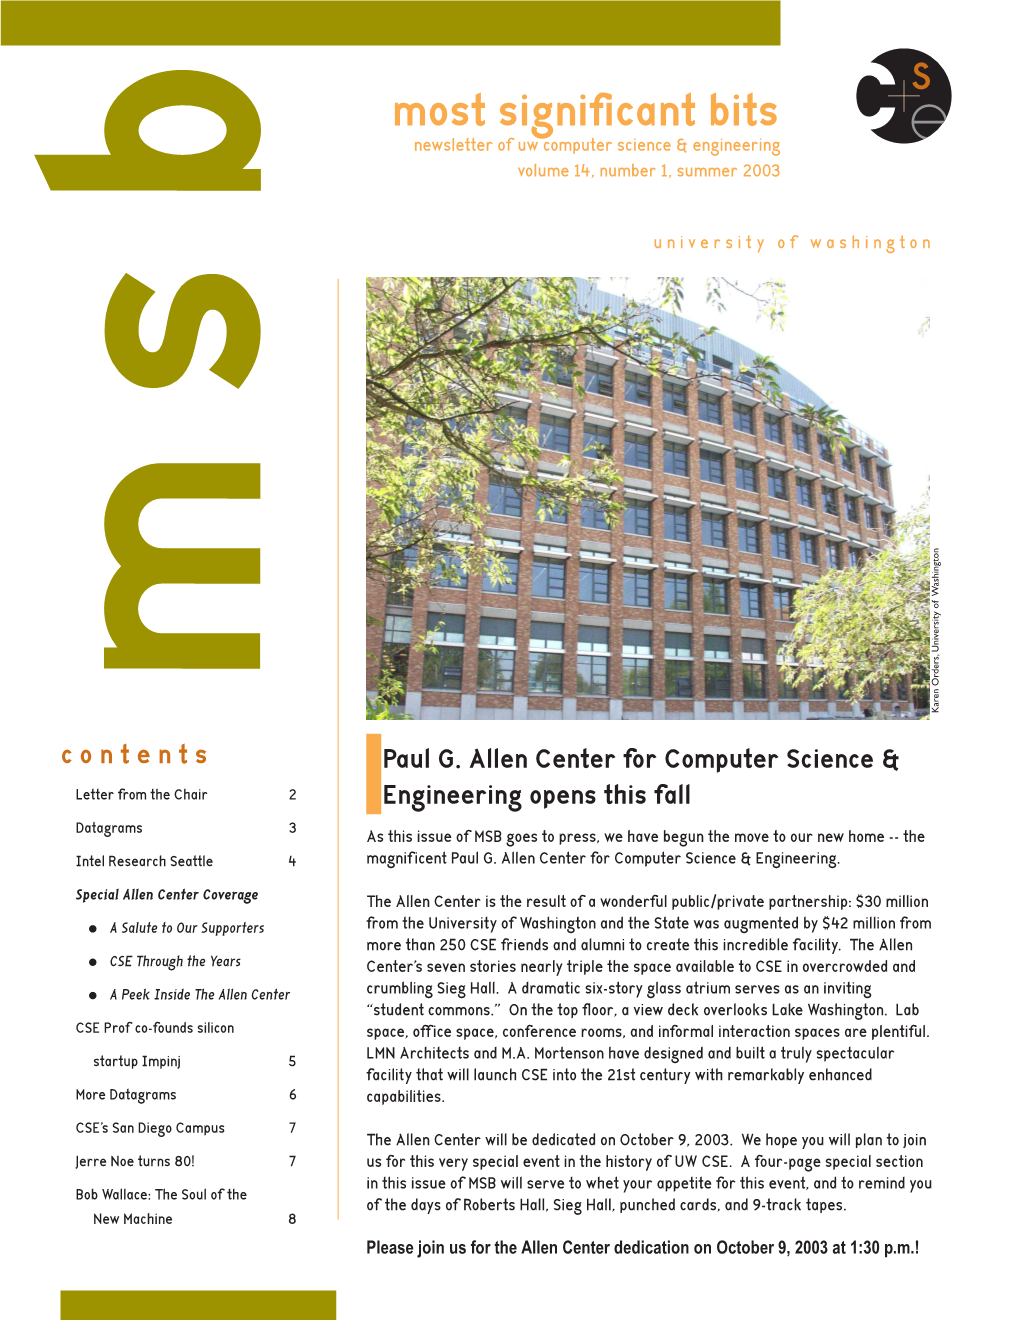 Most Significant Bits Newsletter of Uw Computer Science & Engineering Volume 14, Number 1, Summer 2003